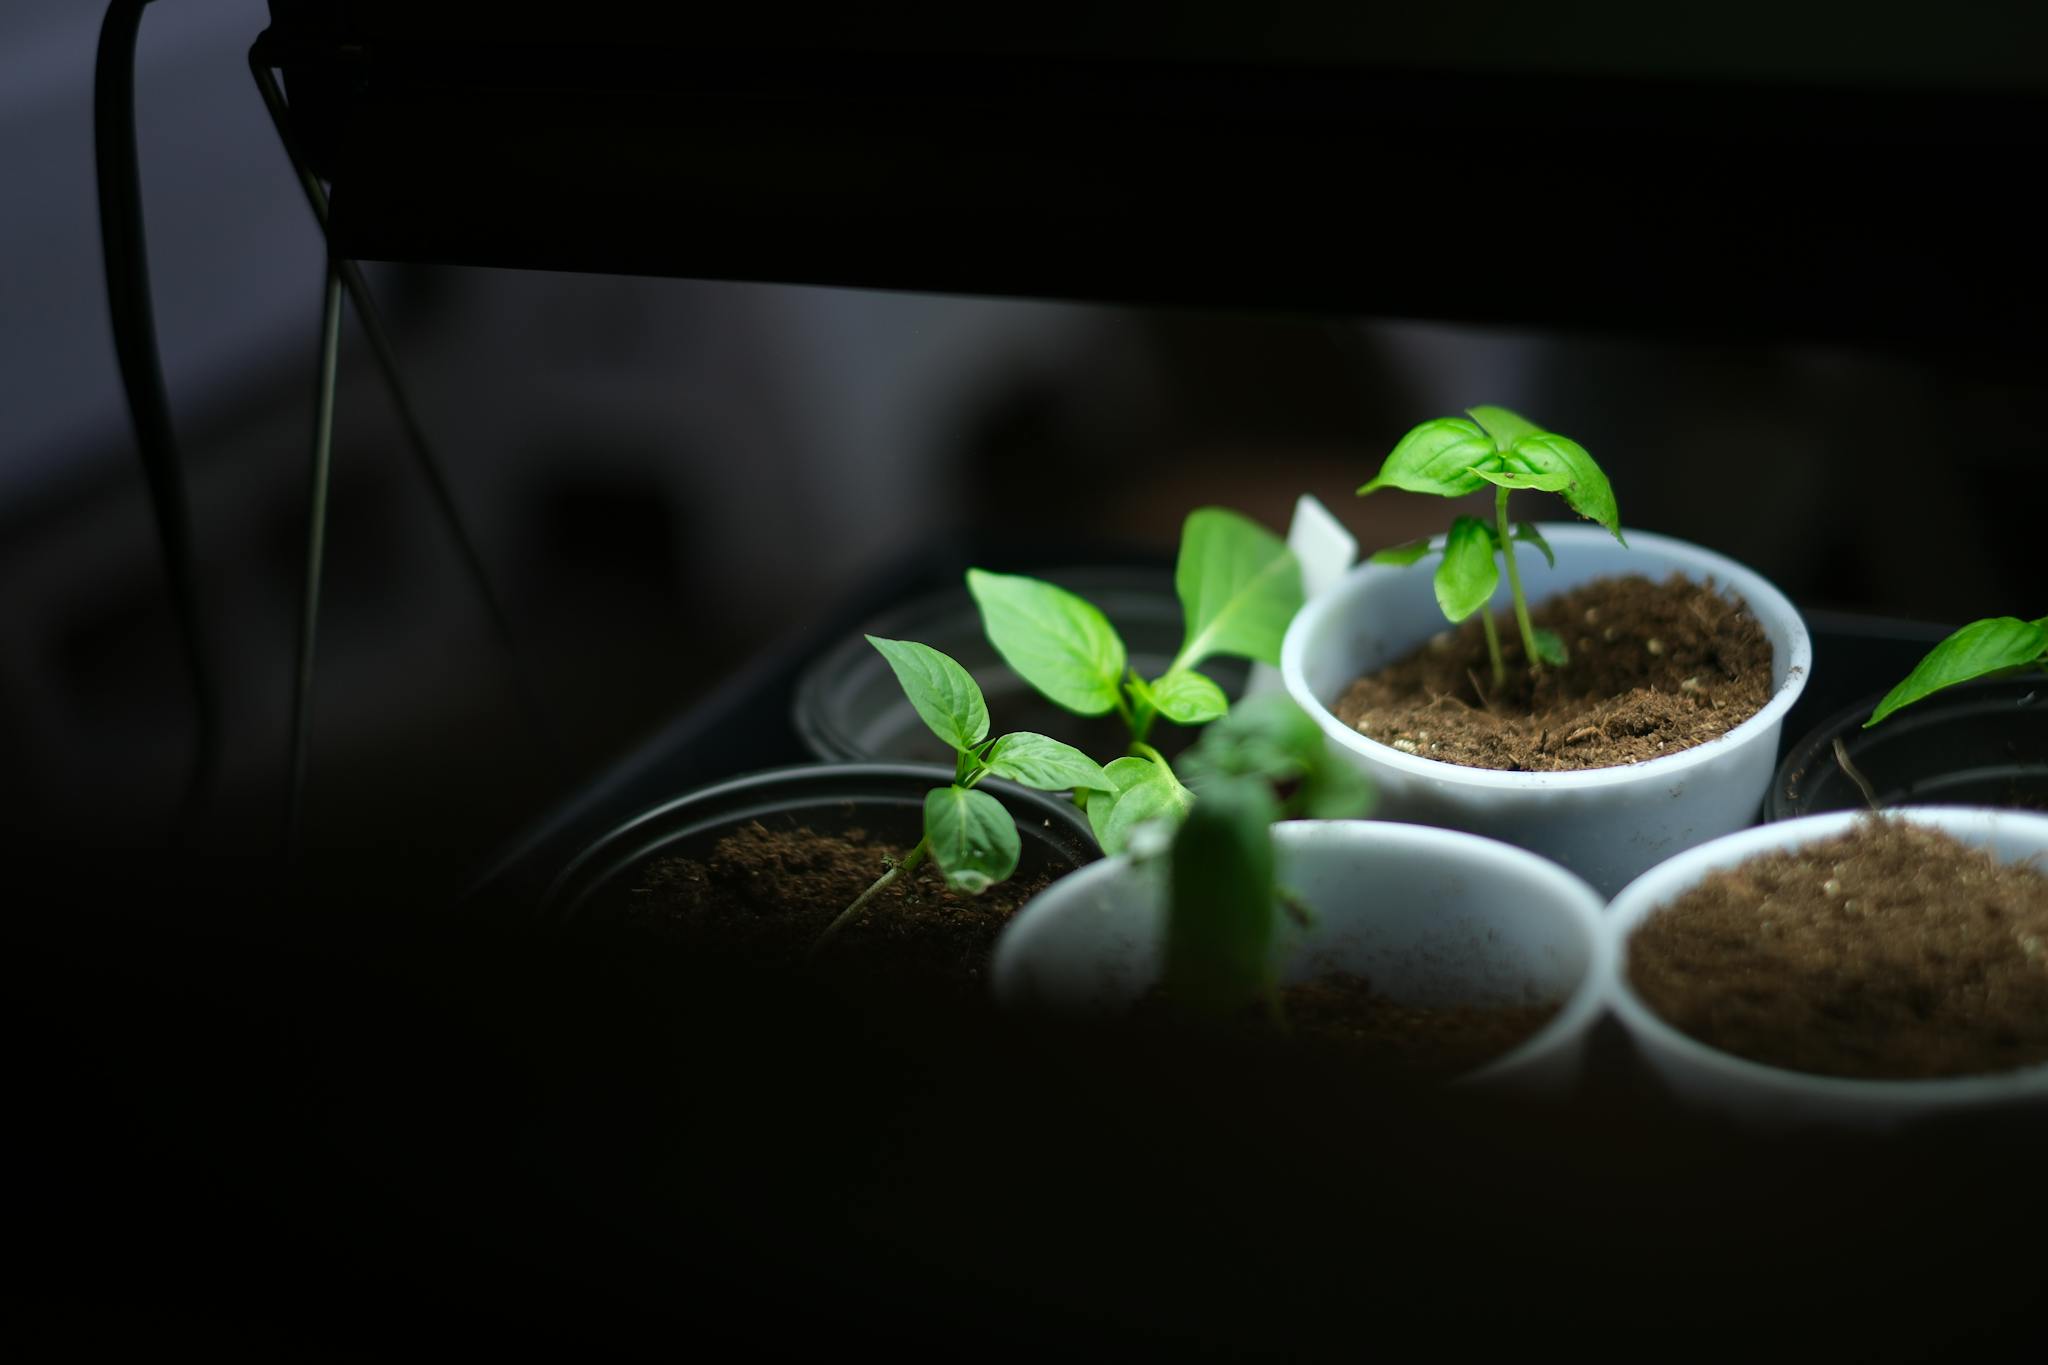 Young plants sprout in white containers under a beam of light in a darkened setting